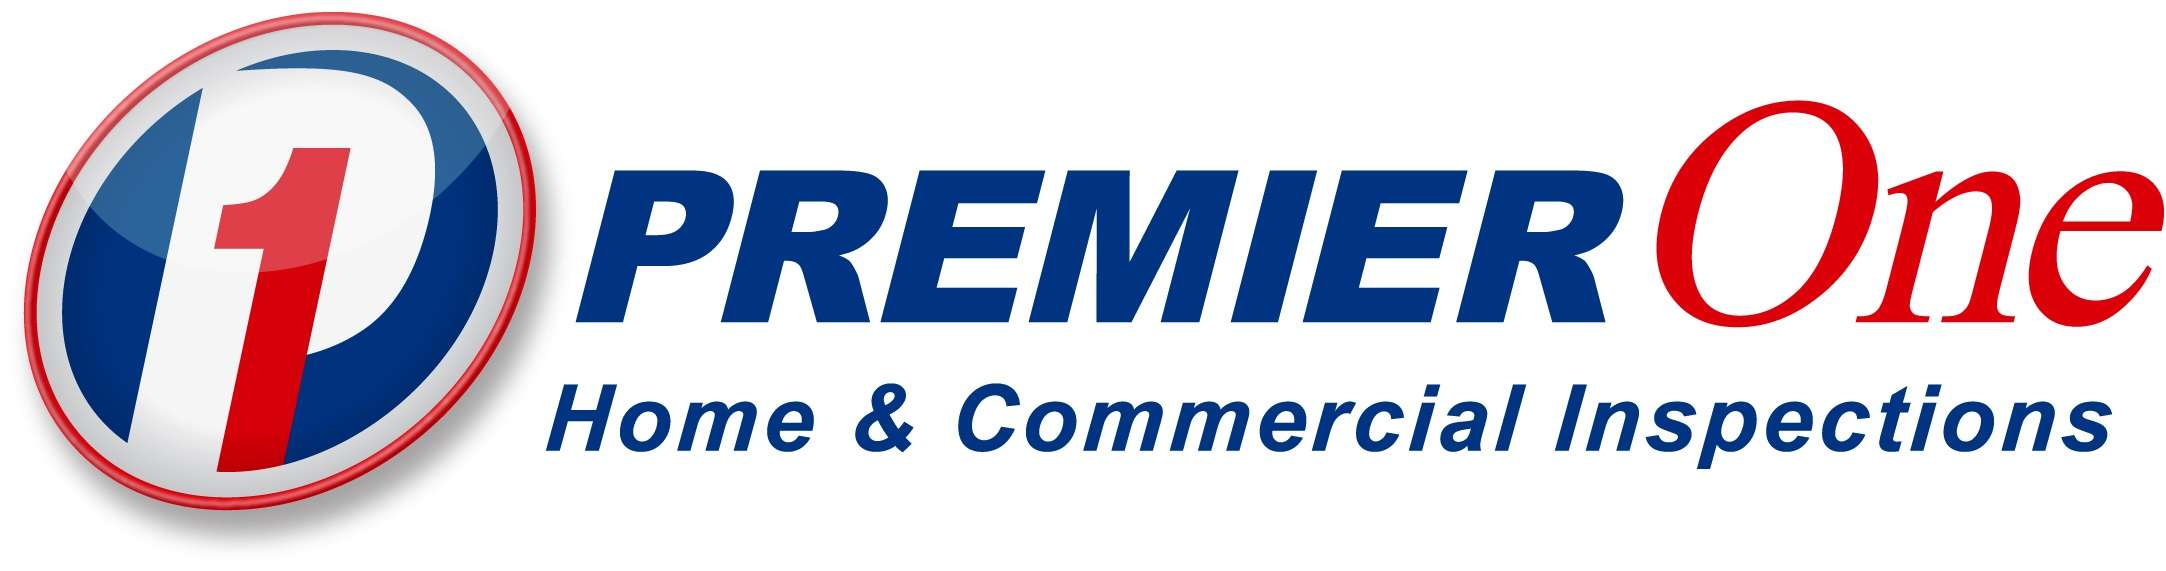 Premier One Home & Commercial Inspections Logo